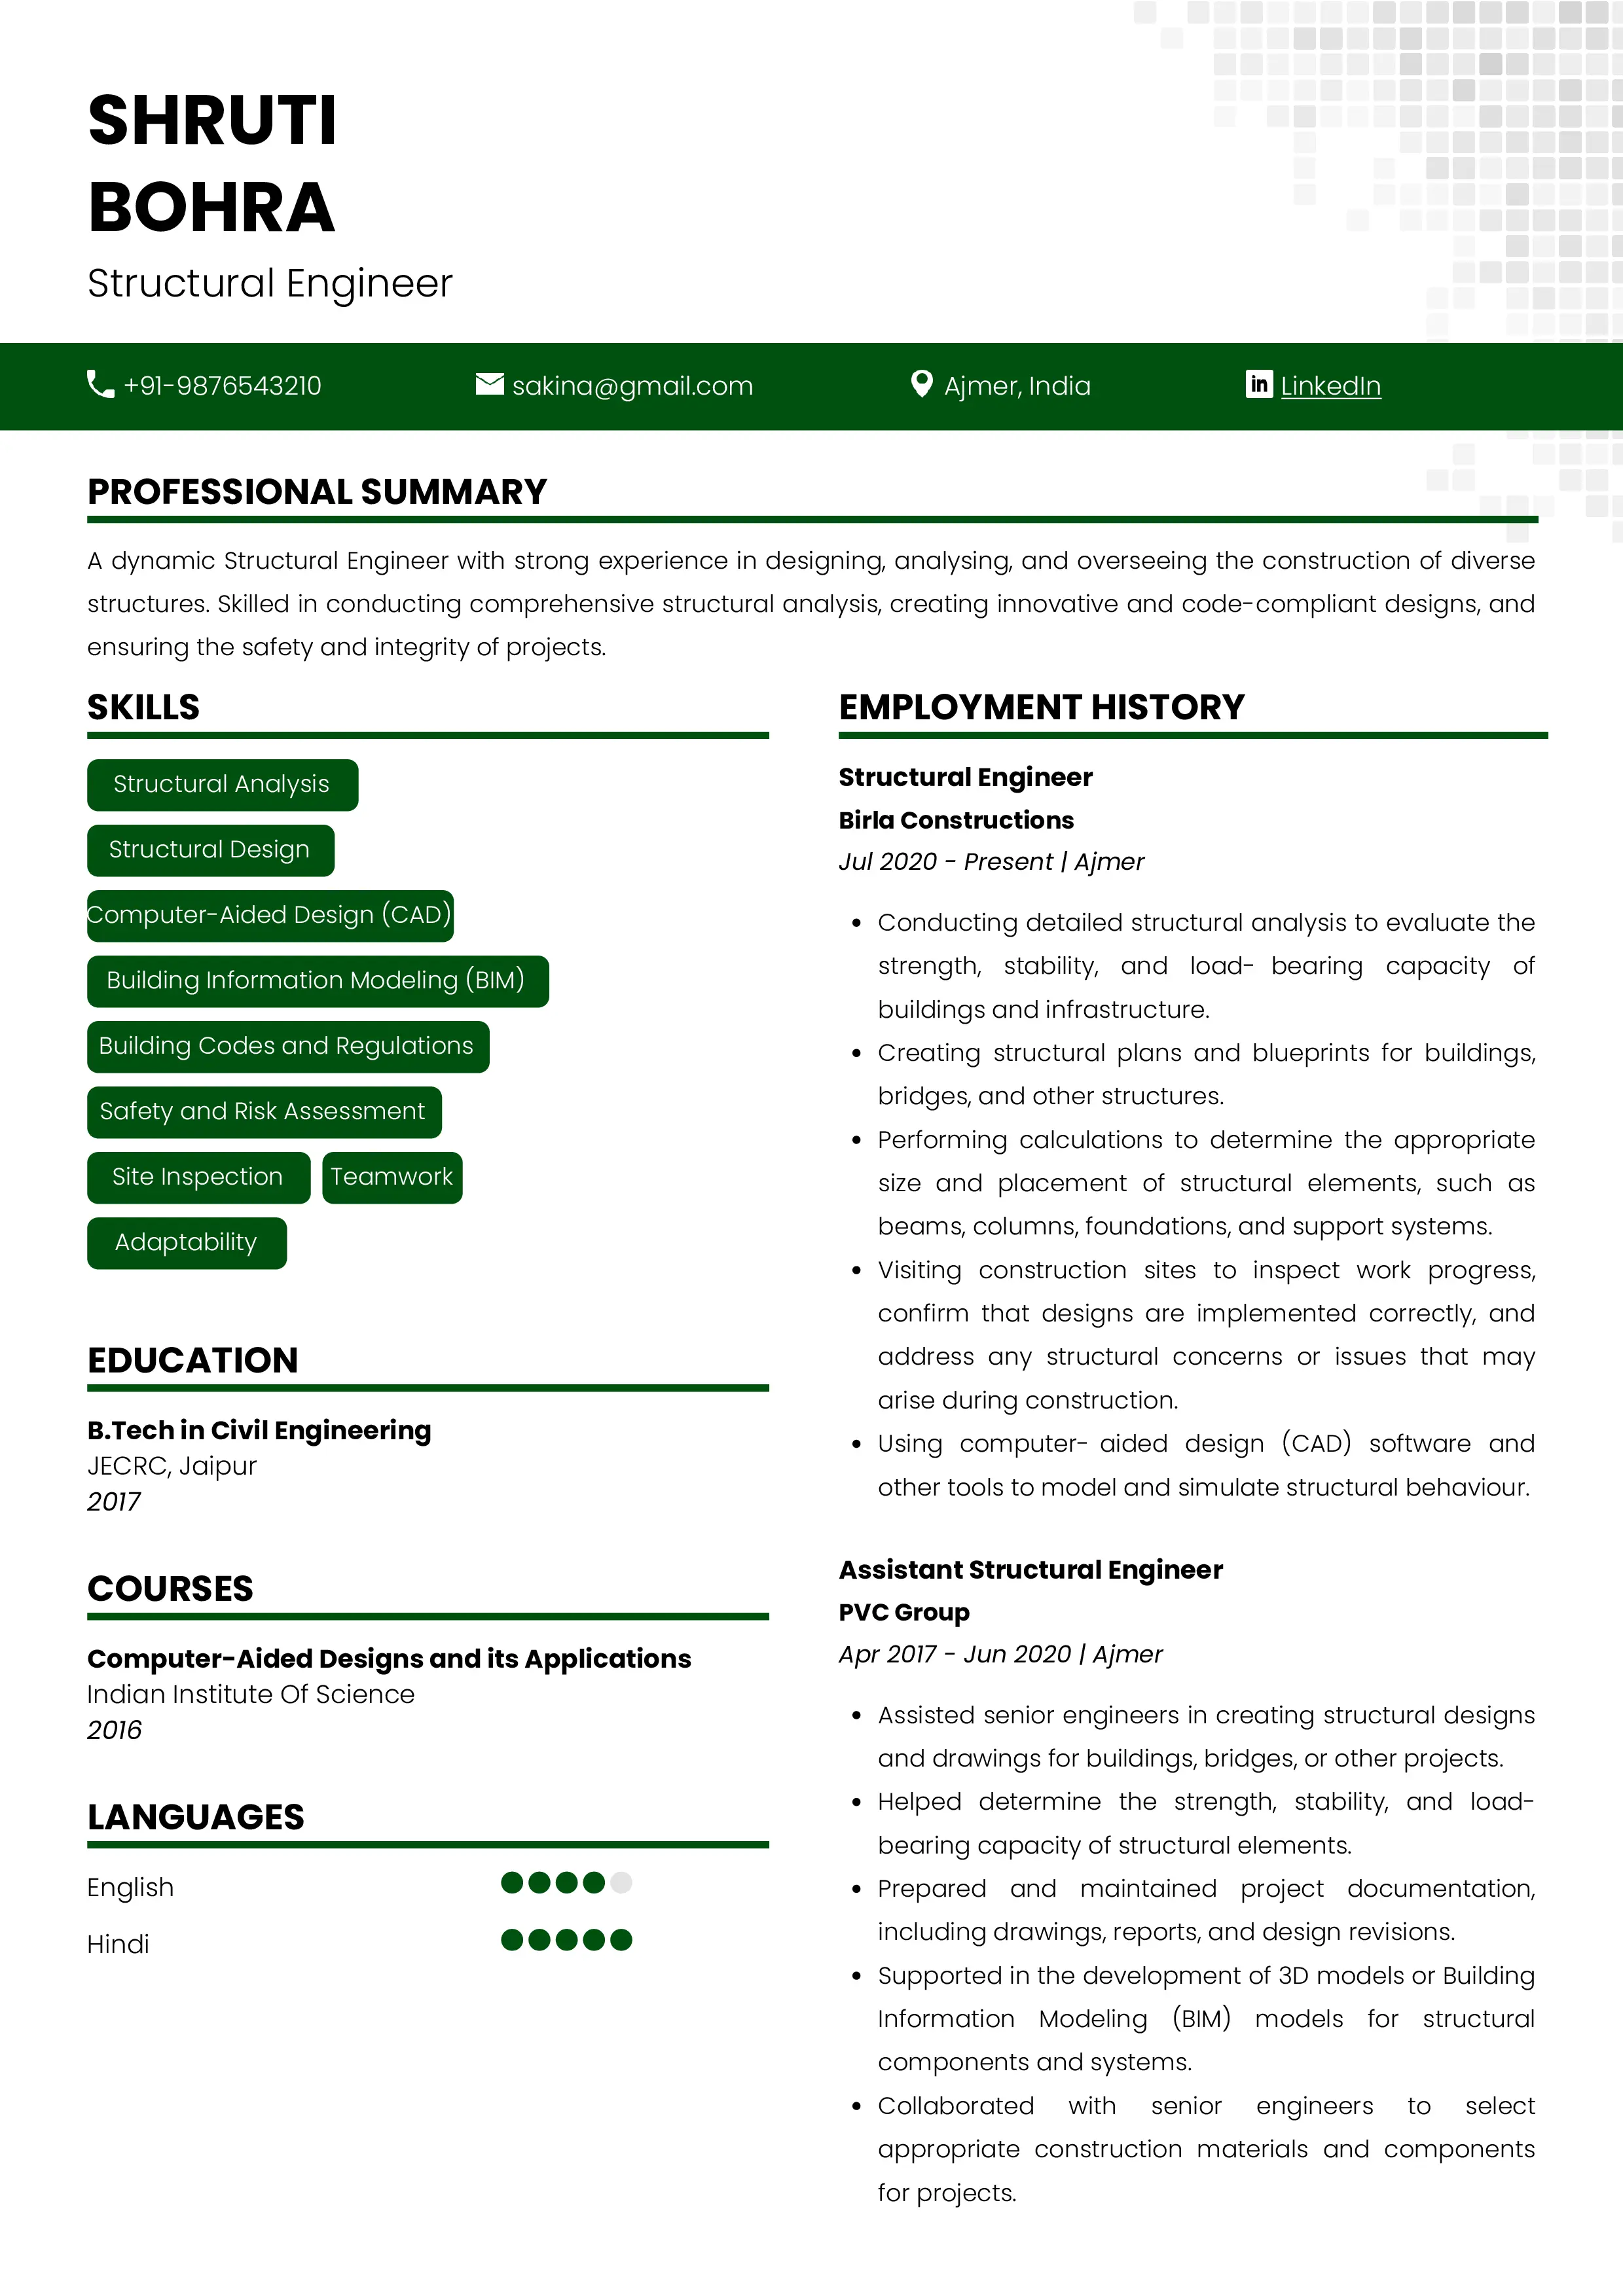 Sample Resume of Structural Engineer | Free Resume Templates & Samples on Resumod.co